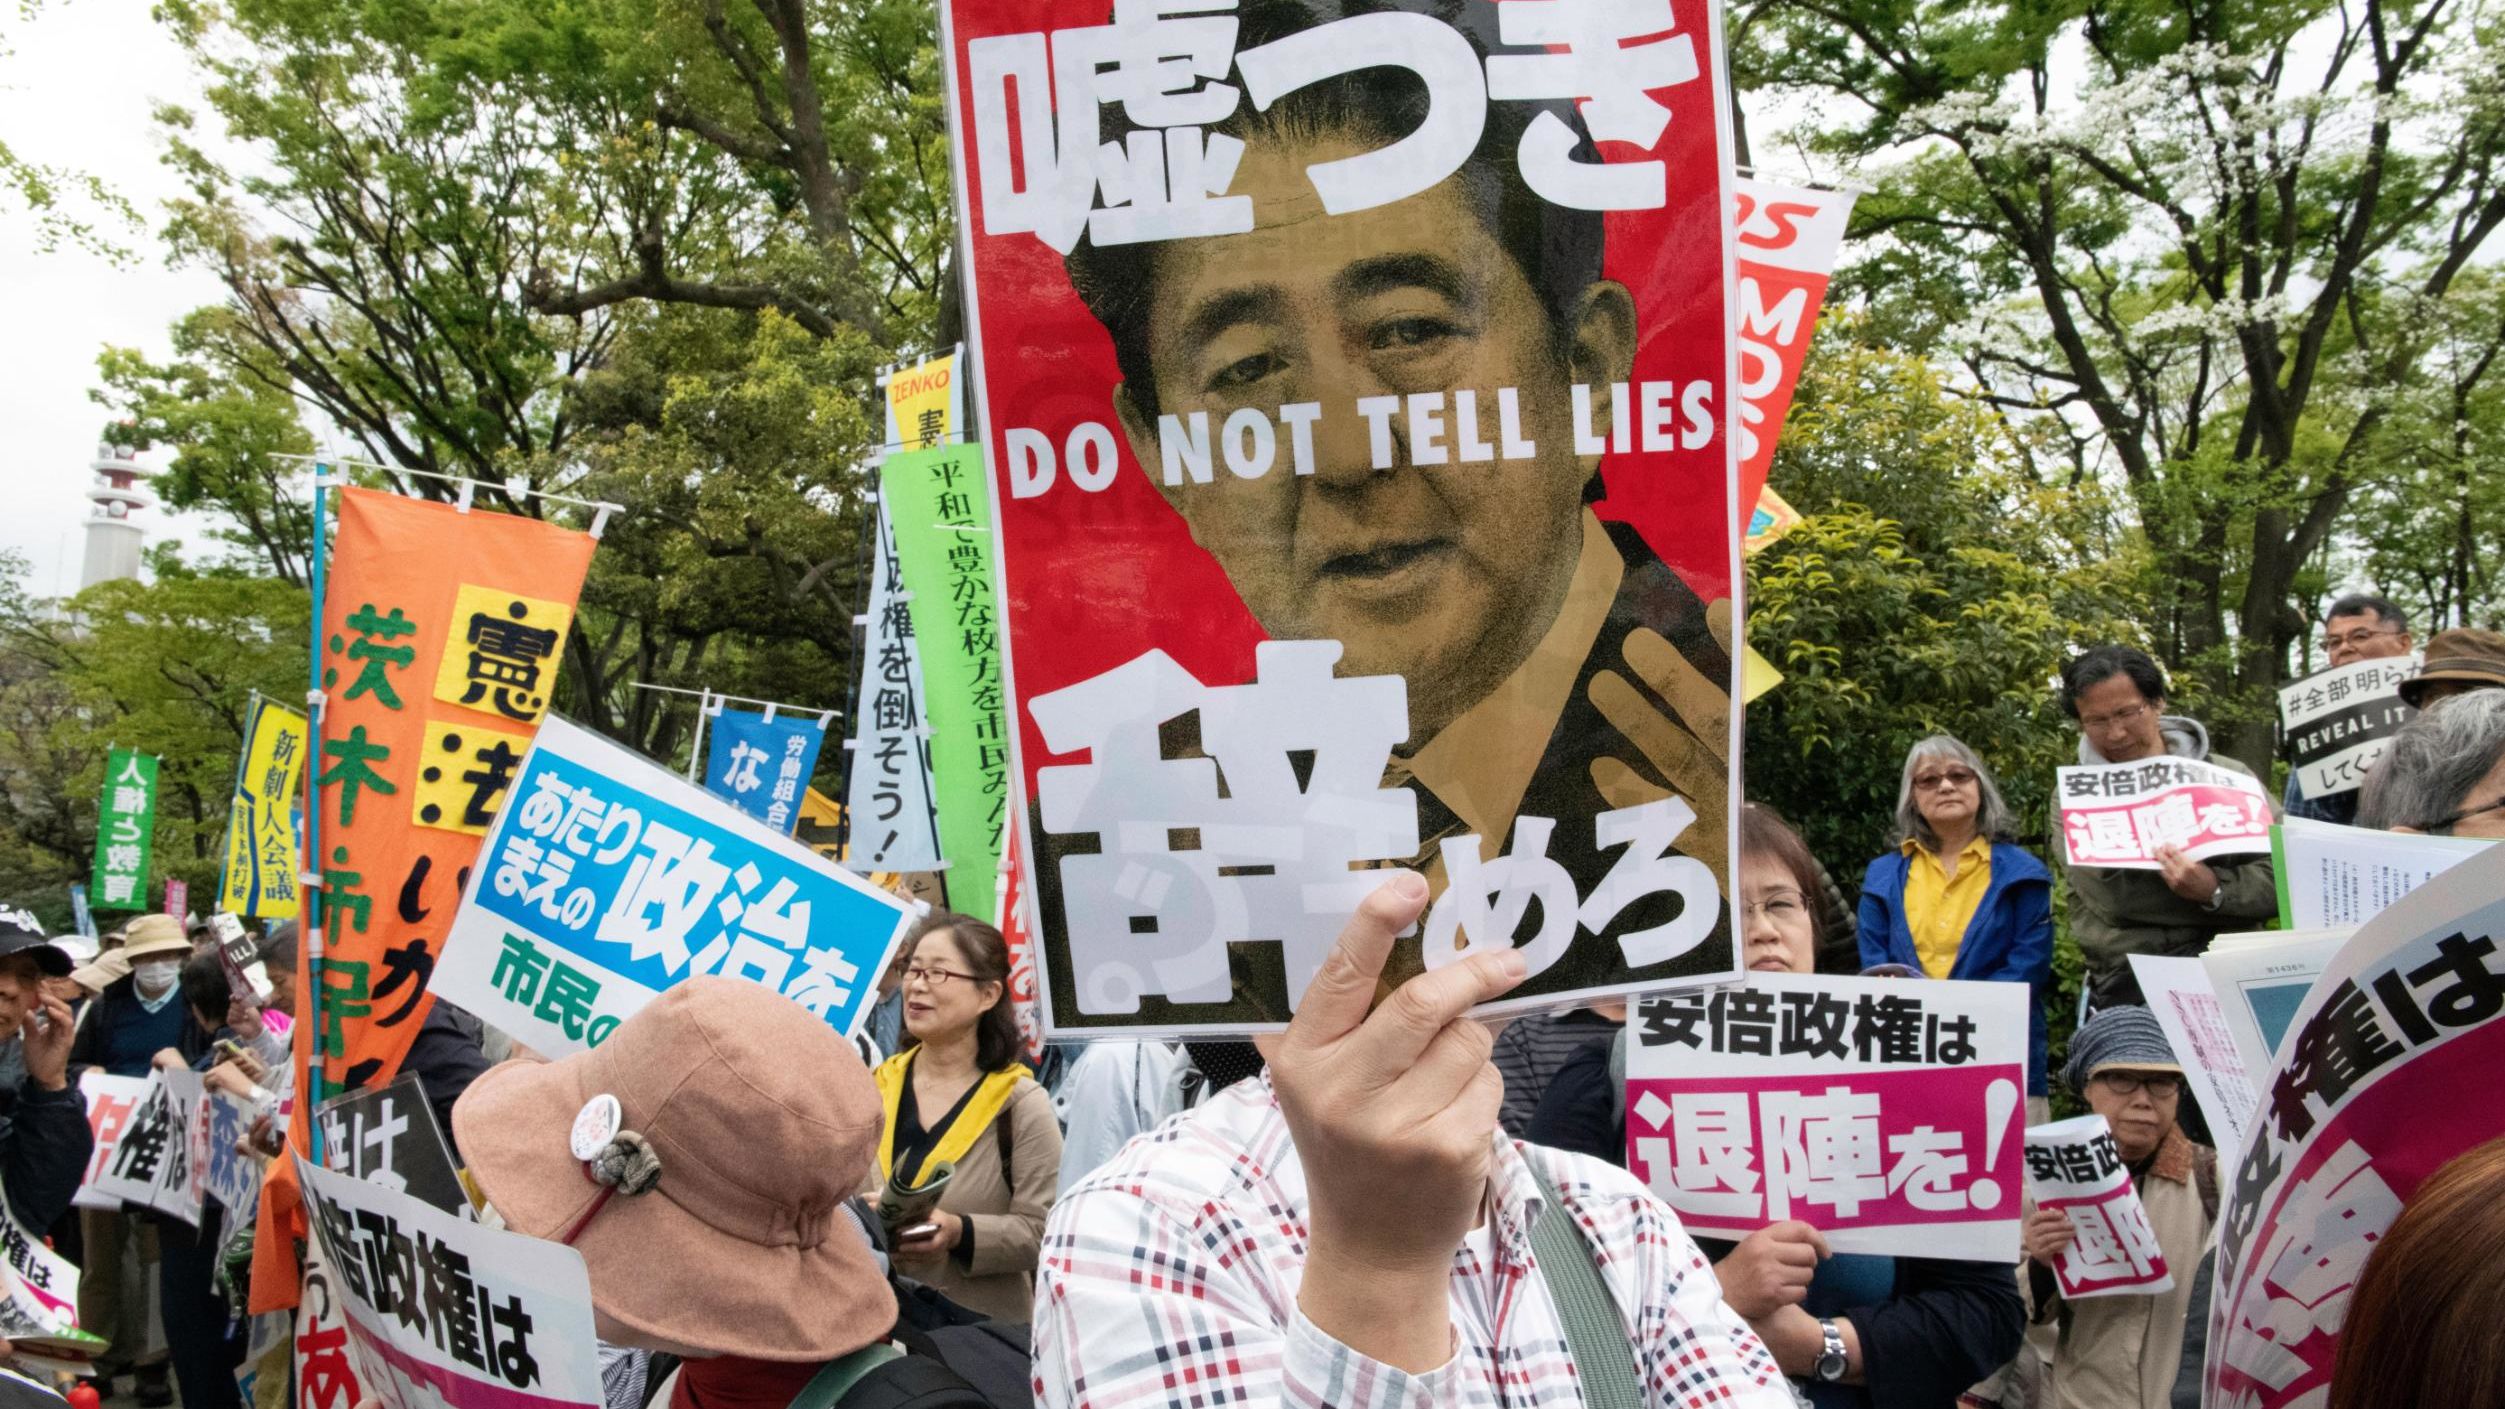 A protester holds a placard during a demonstration against Japan's Prime Minister Shinzo Abe on April 14, 2018.